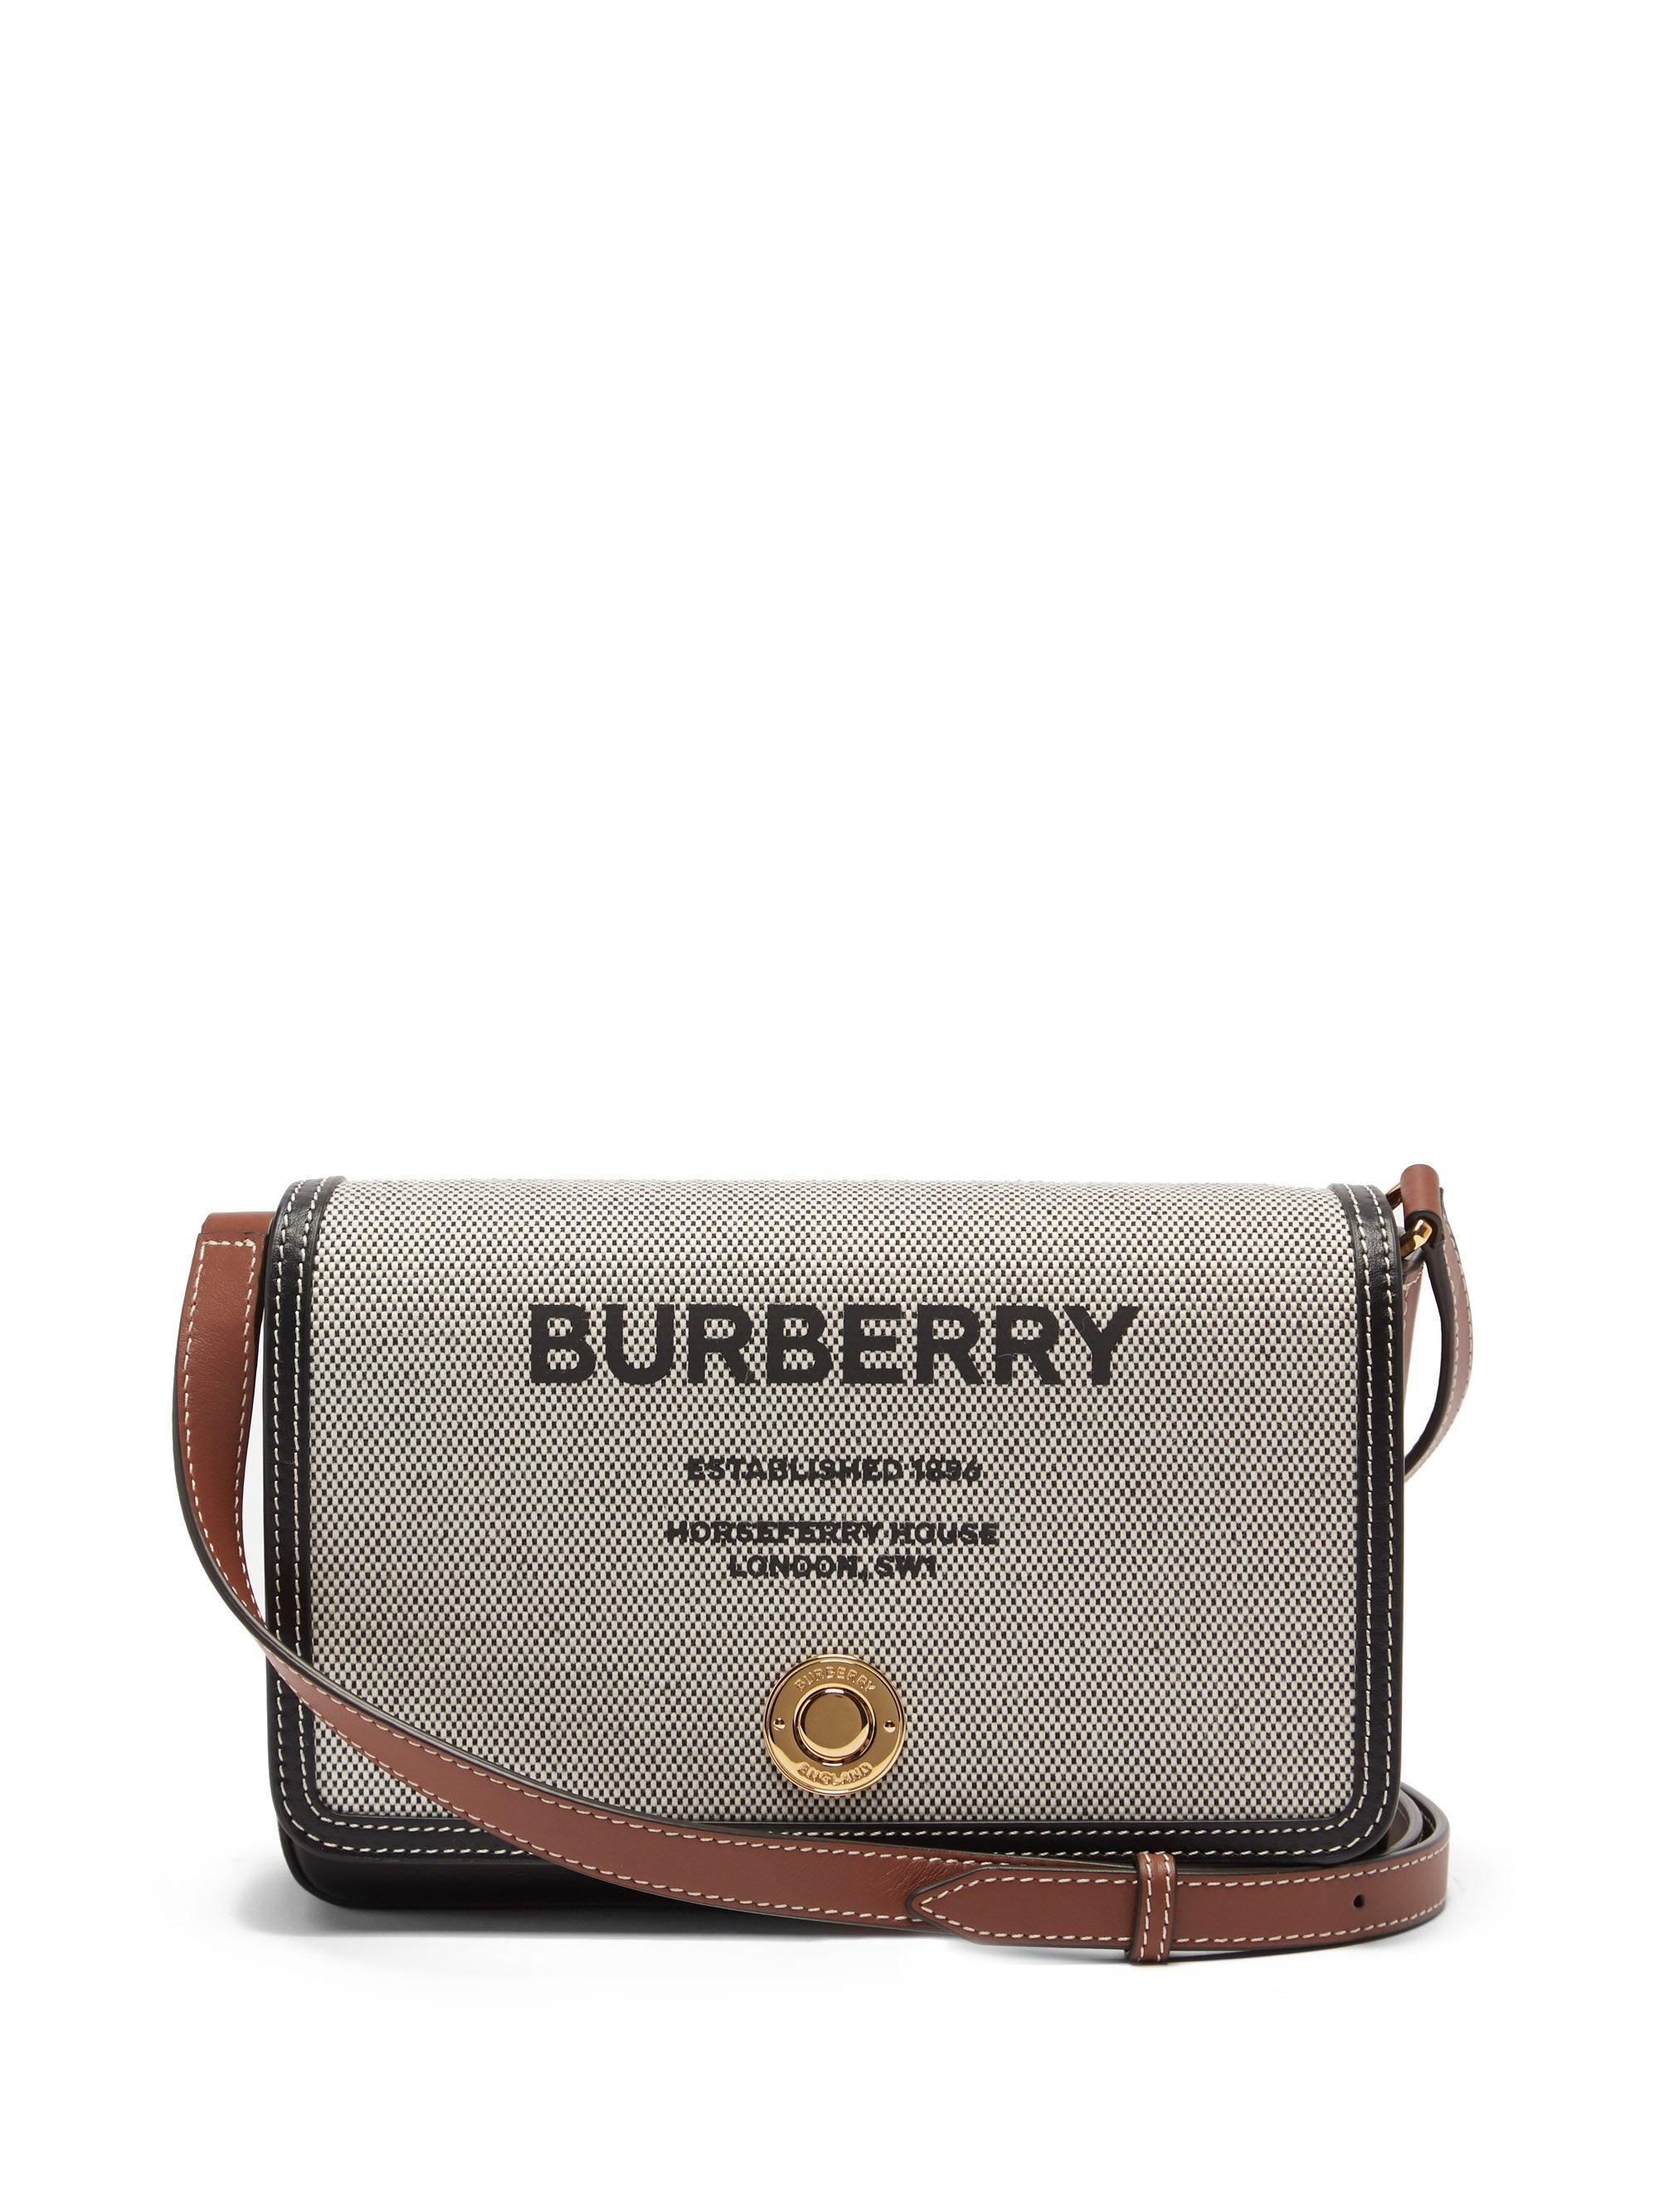 Burberry Hampshire Leather And Canvas Cross-body Bag in Black | Lyst